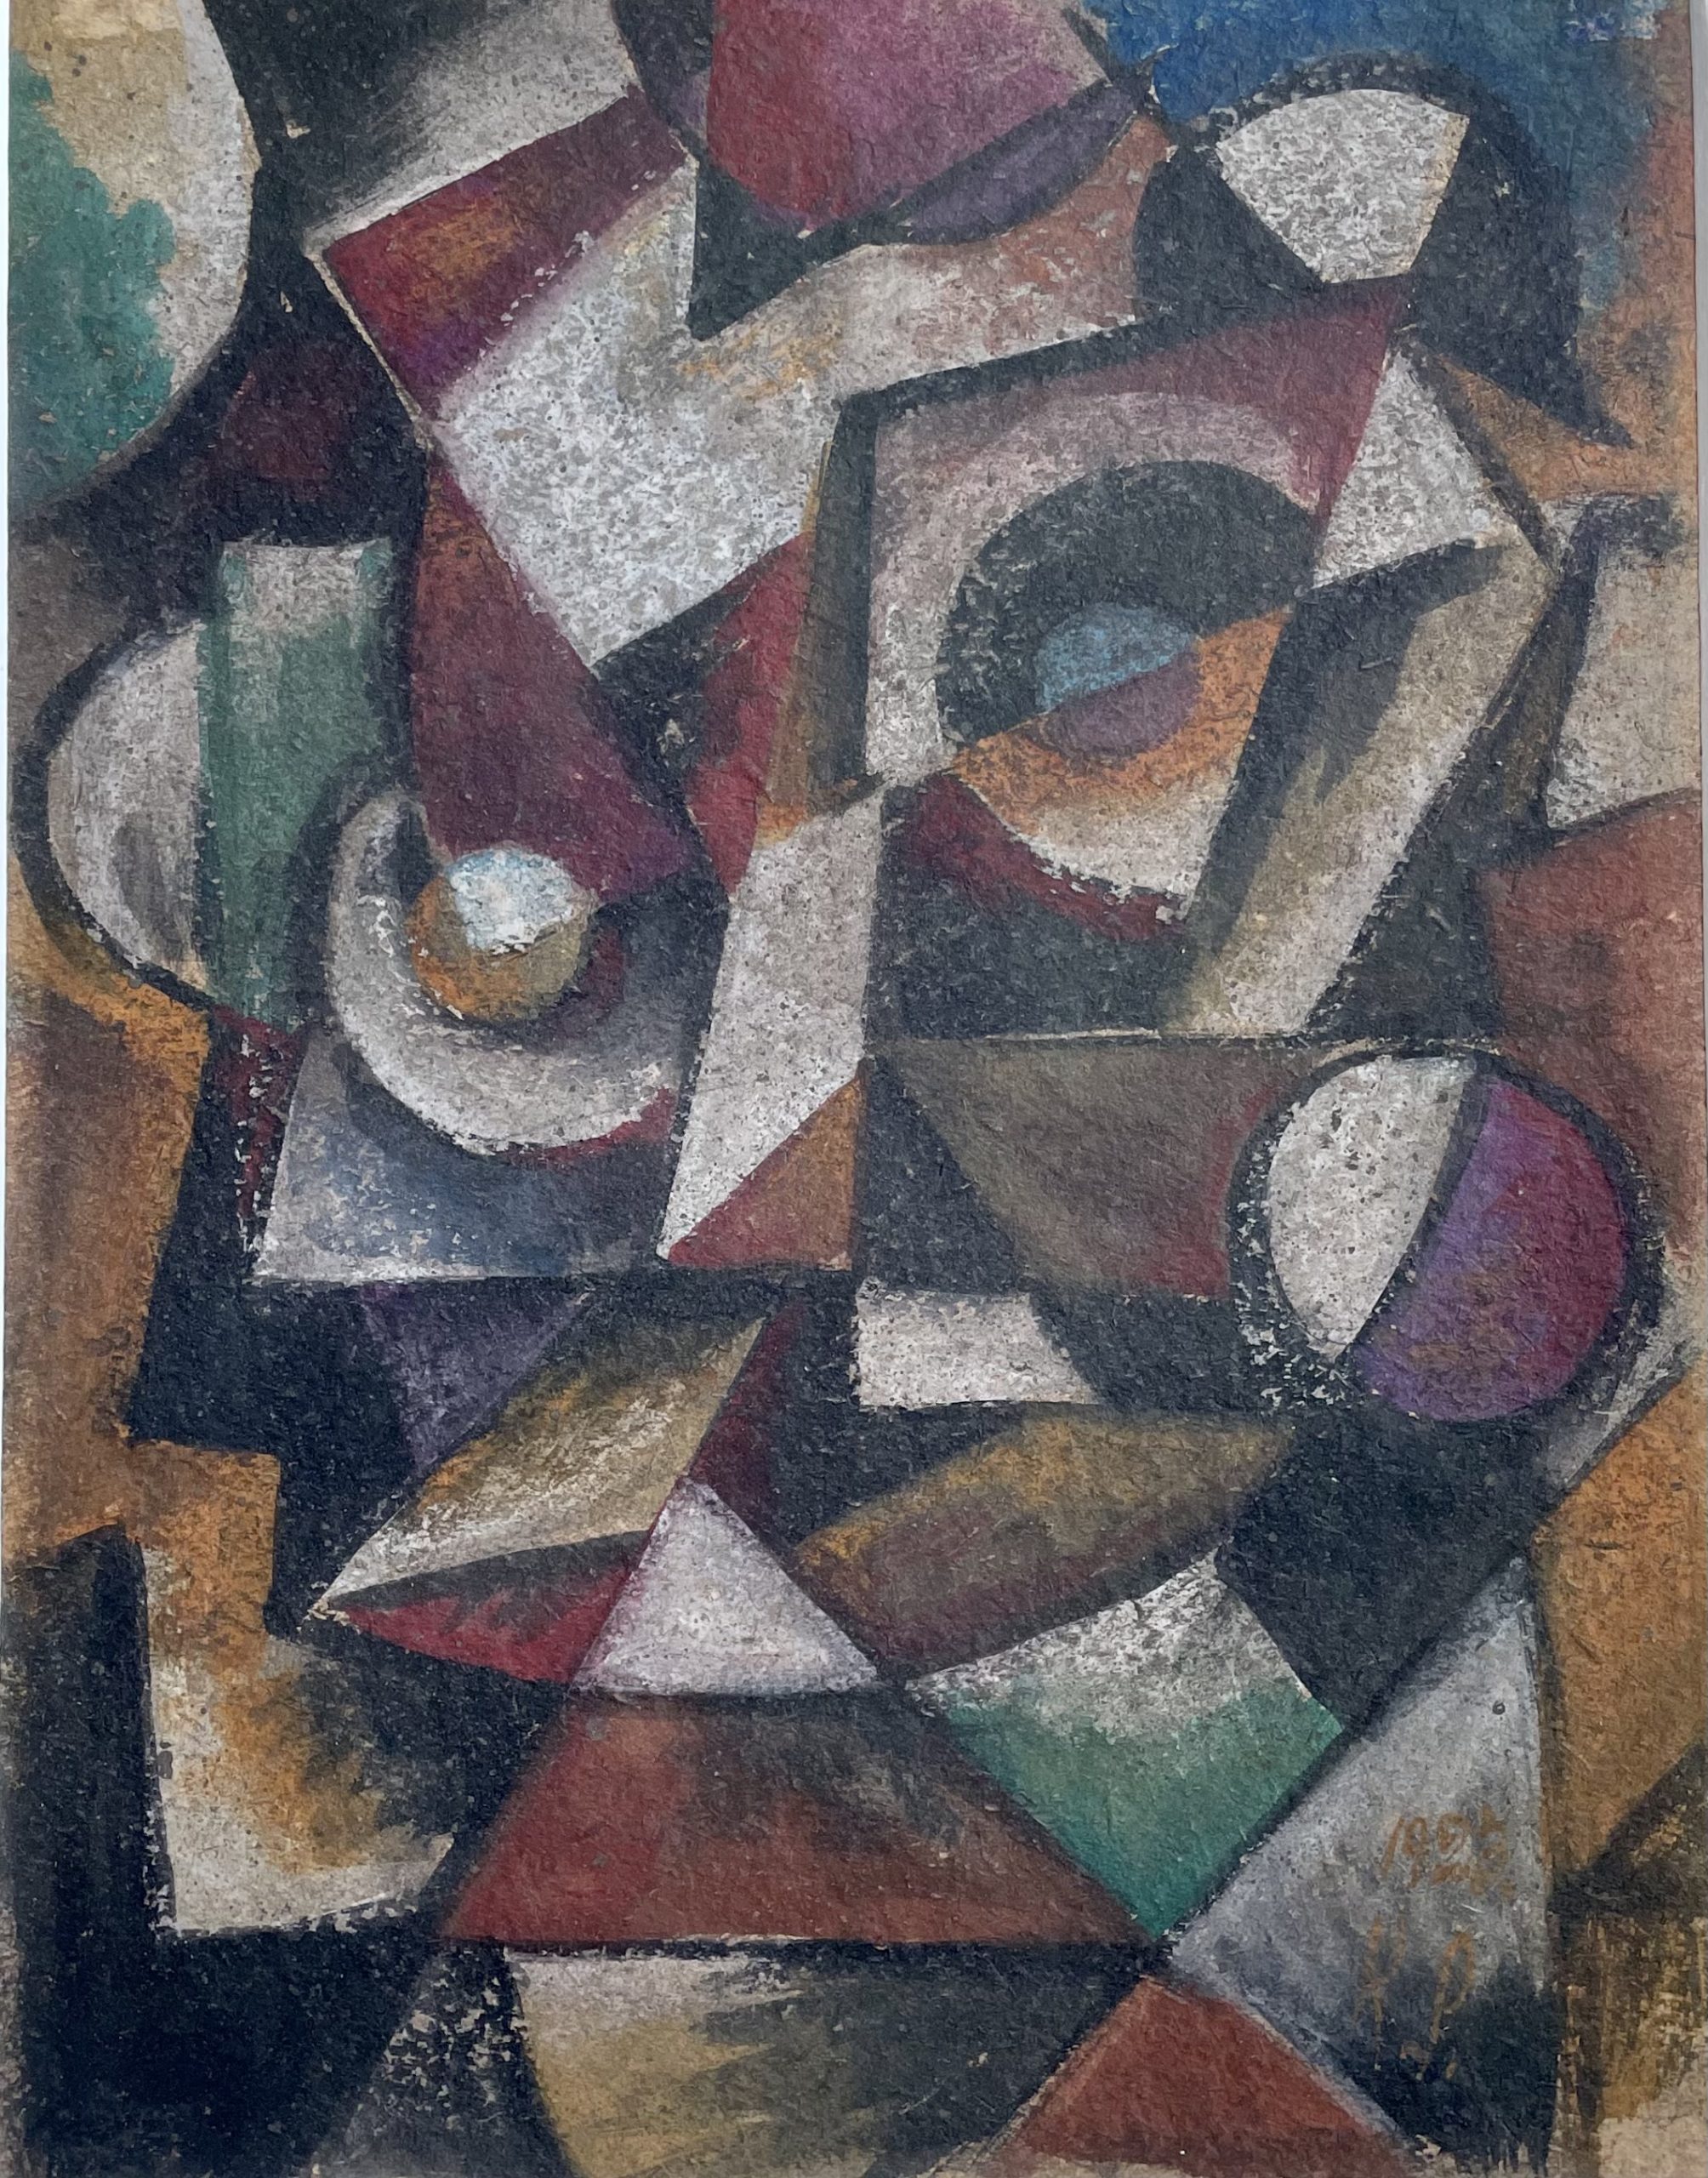 Konstant Rysovsky (1896 - 1937), mixed technique from 1923, 20 x 25 cm